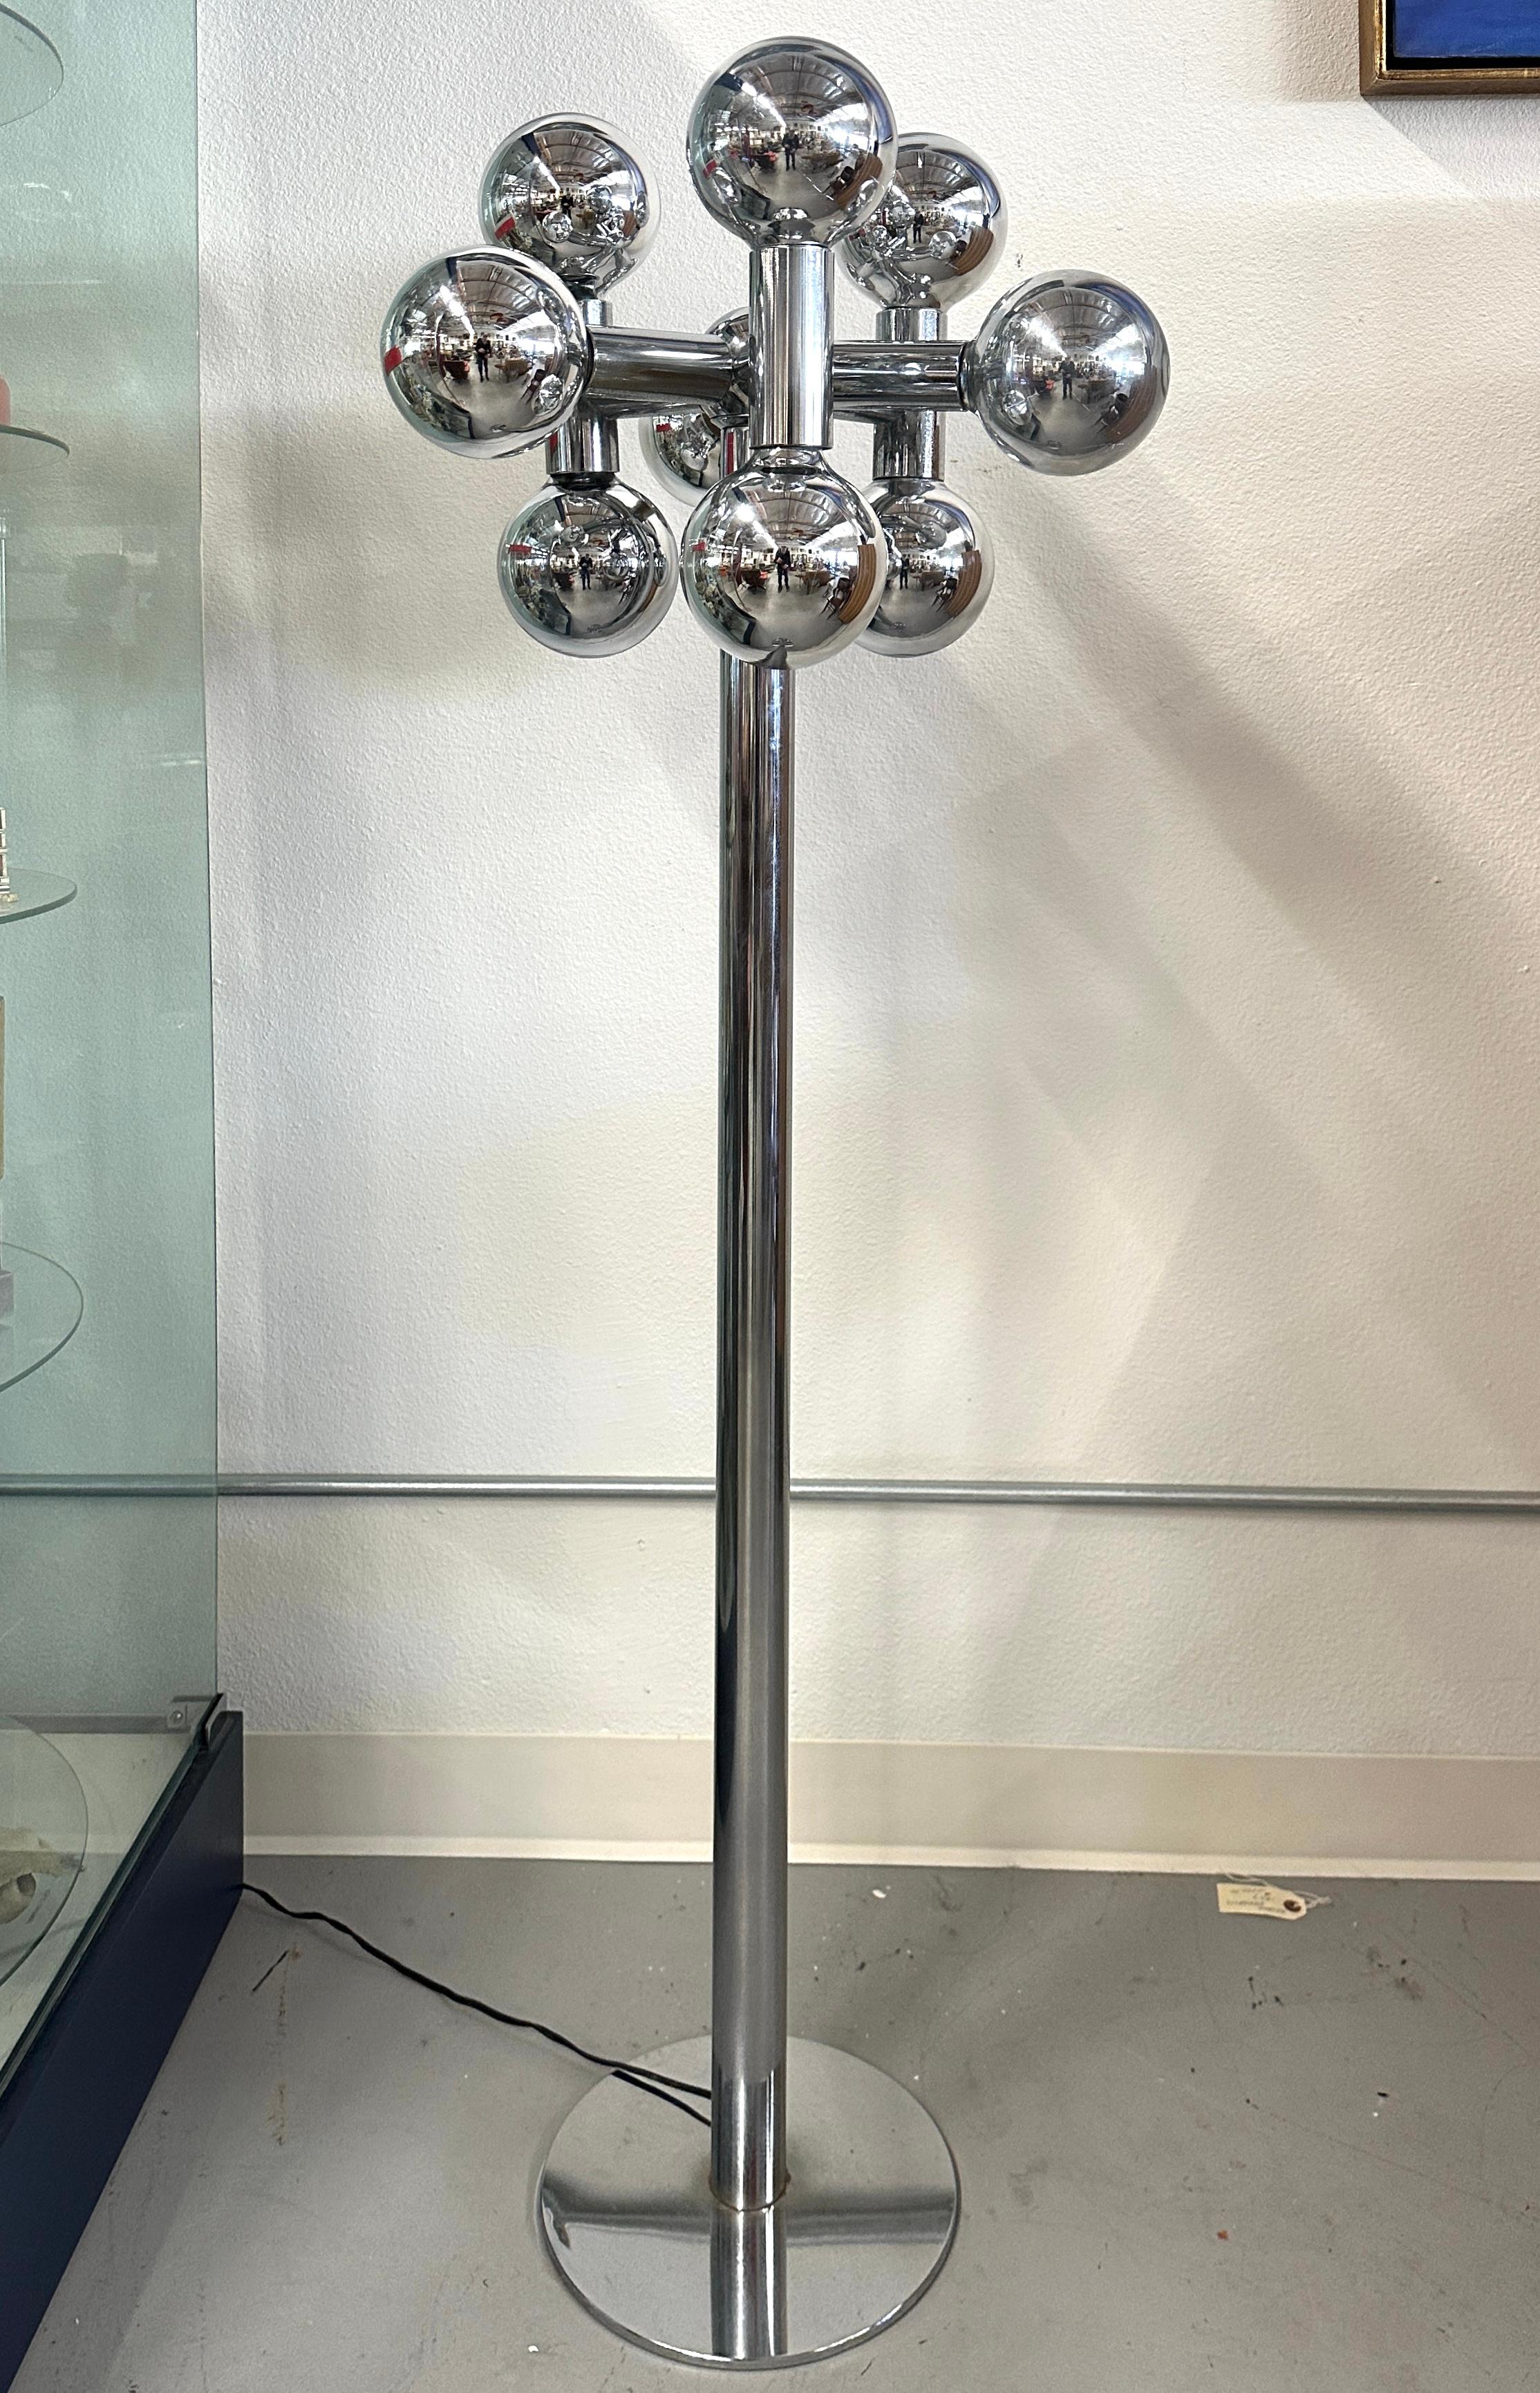 Wonderful chrome “molecule” or “atomic” globe lamp by Sonneman Lighting from the 1970’s. The lamp is in working condition. It features 9 mirrored globe bulbs that are dimmable. These are original bulbs and of this listing 8 are functional. We have